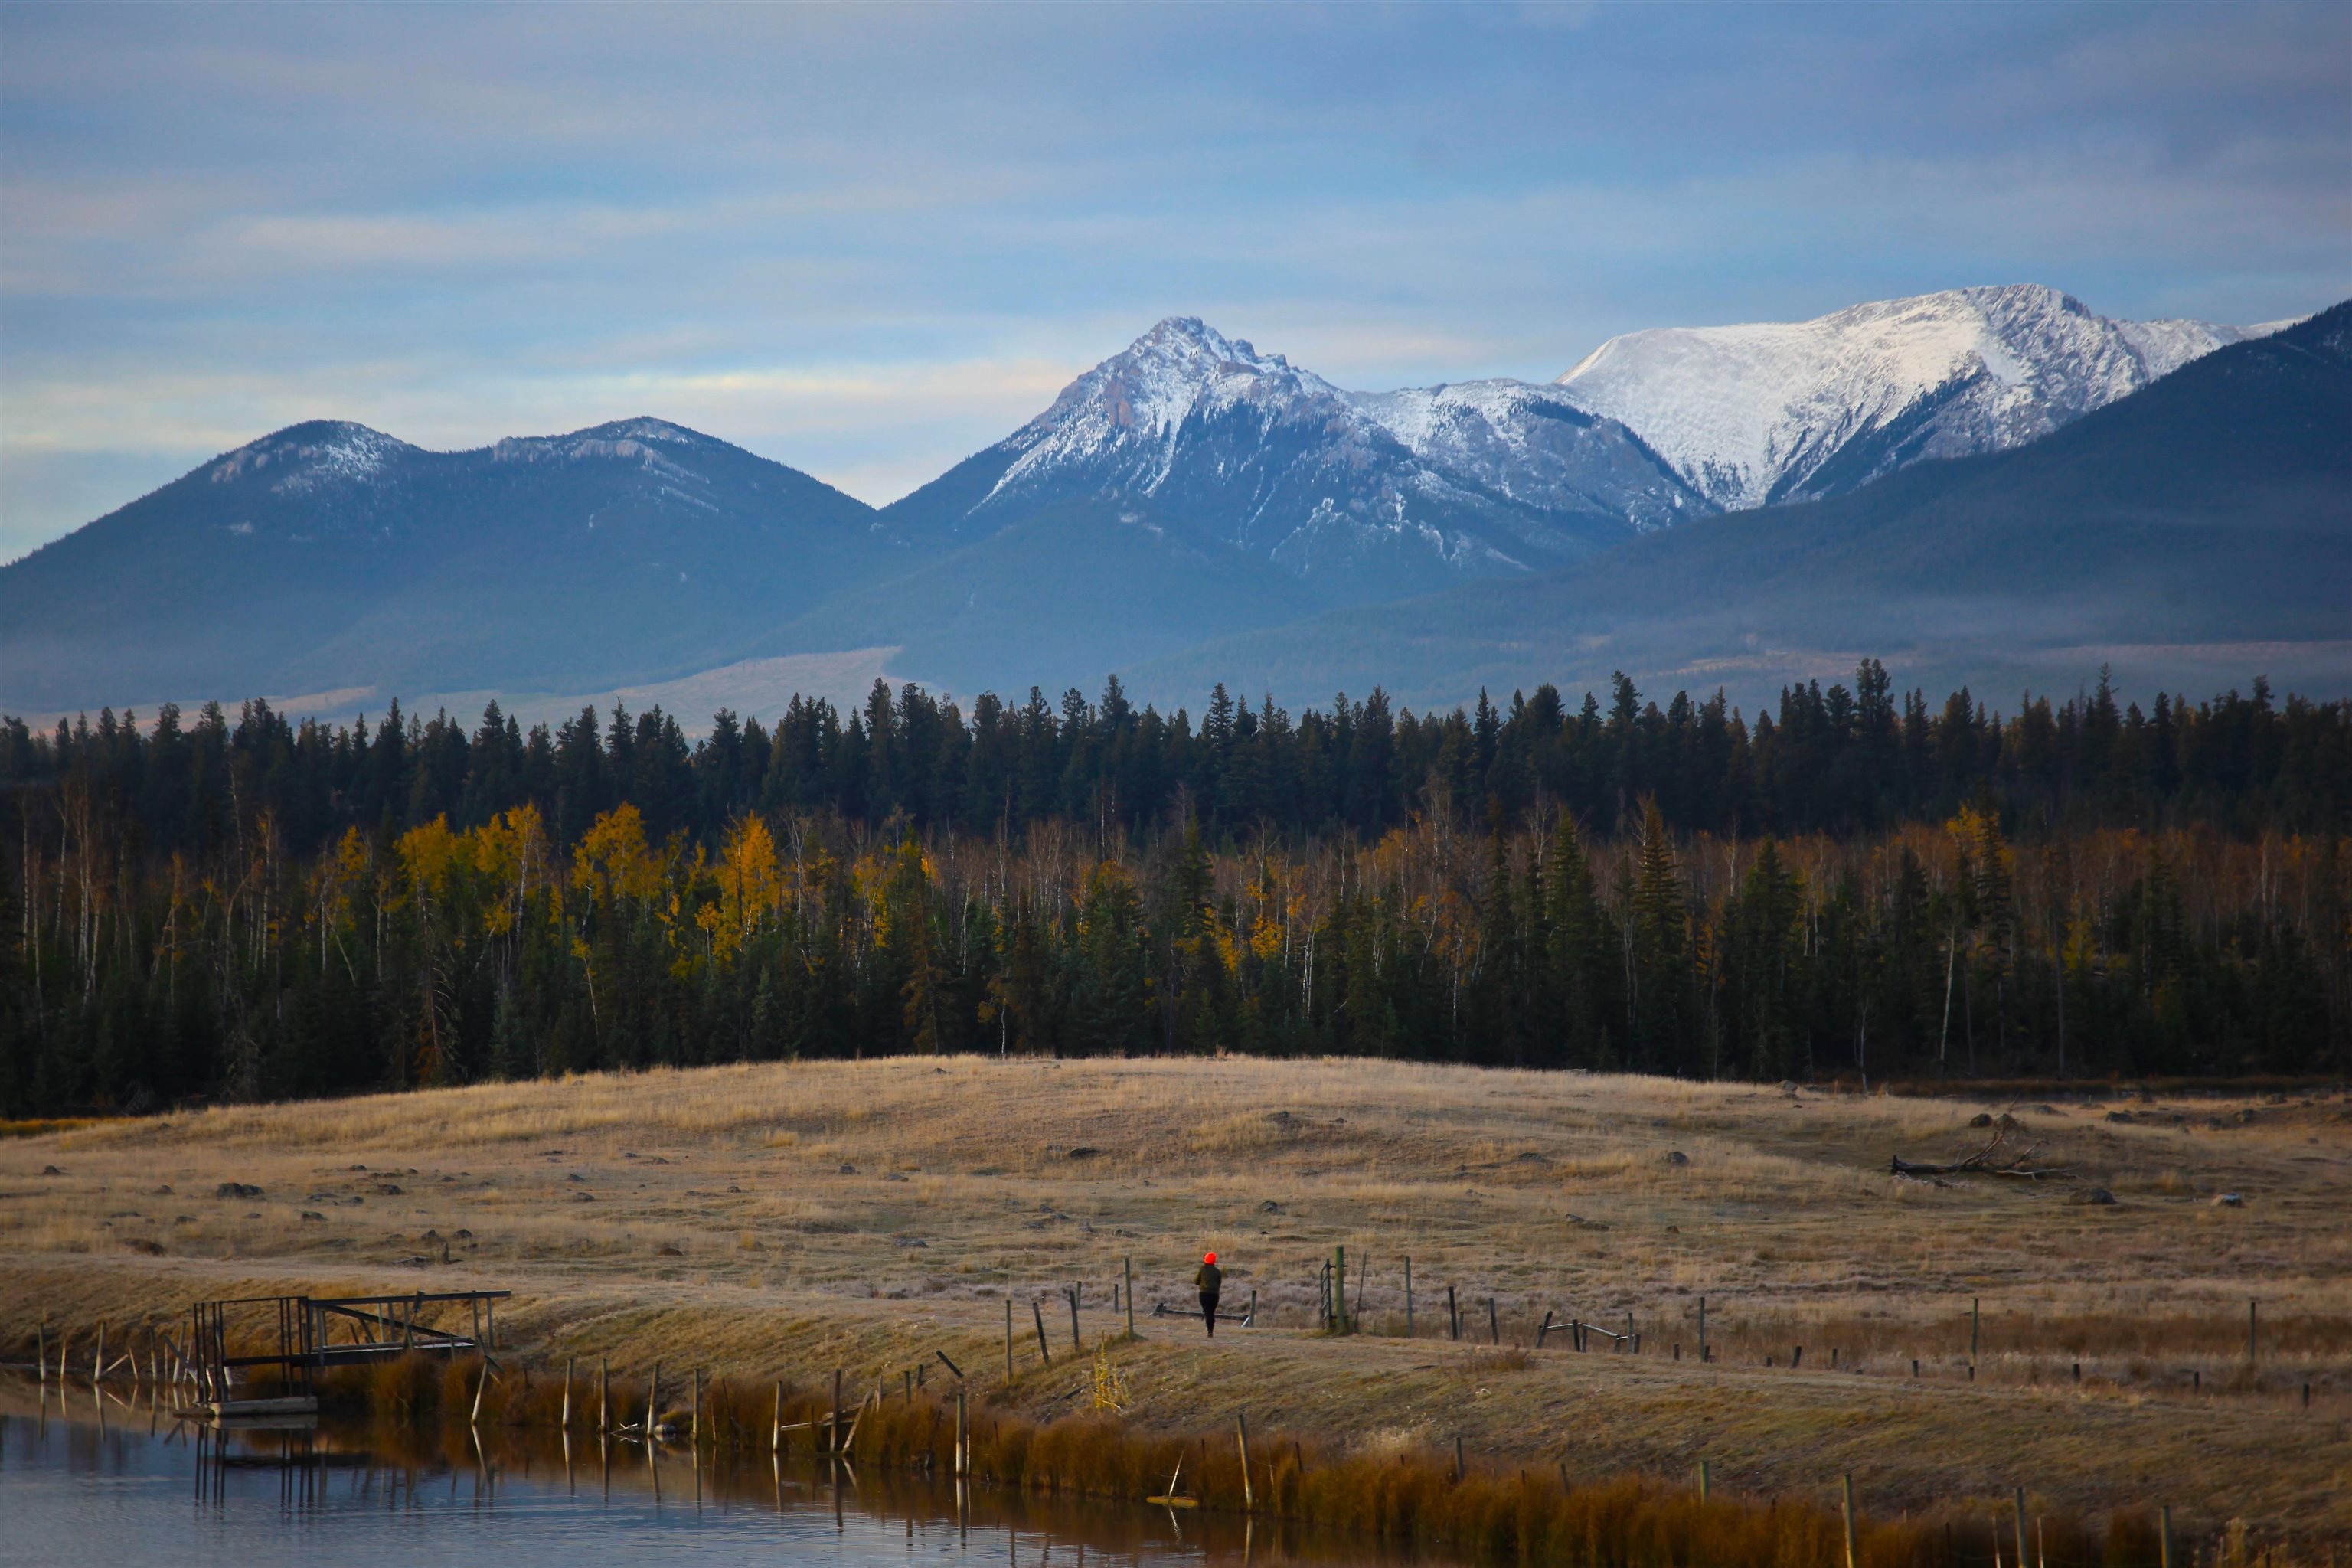 View of the Marble Mountain Range looking southwest from Meadow Lake Ranch